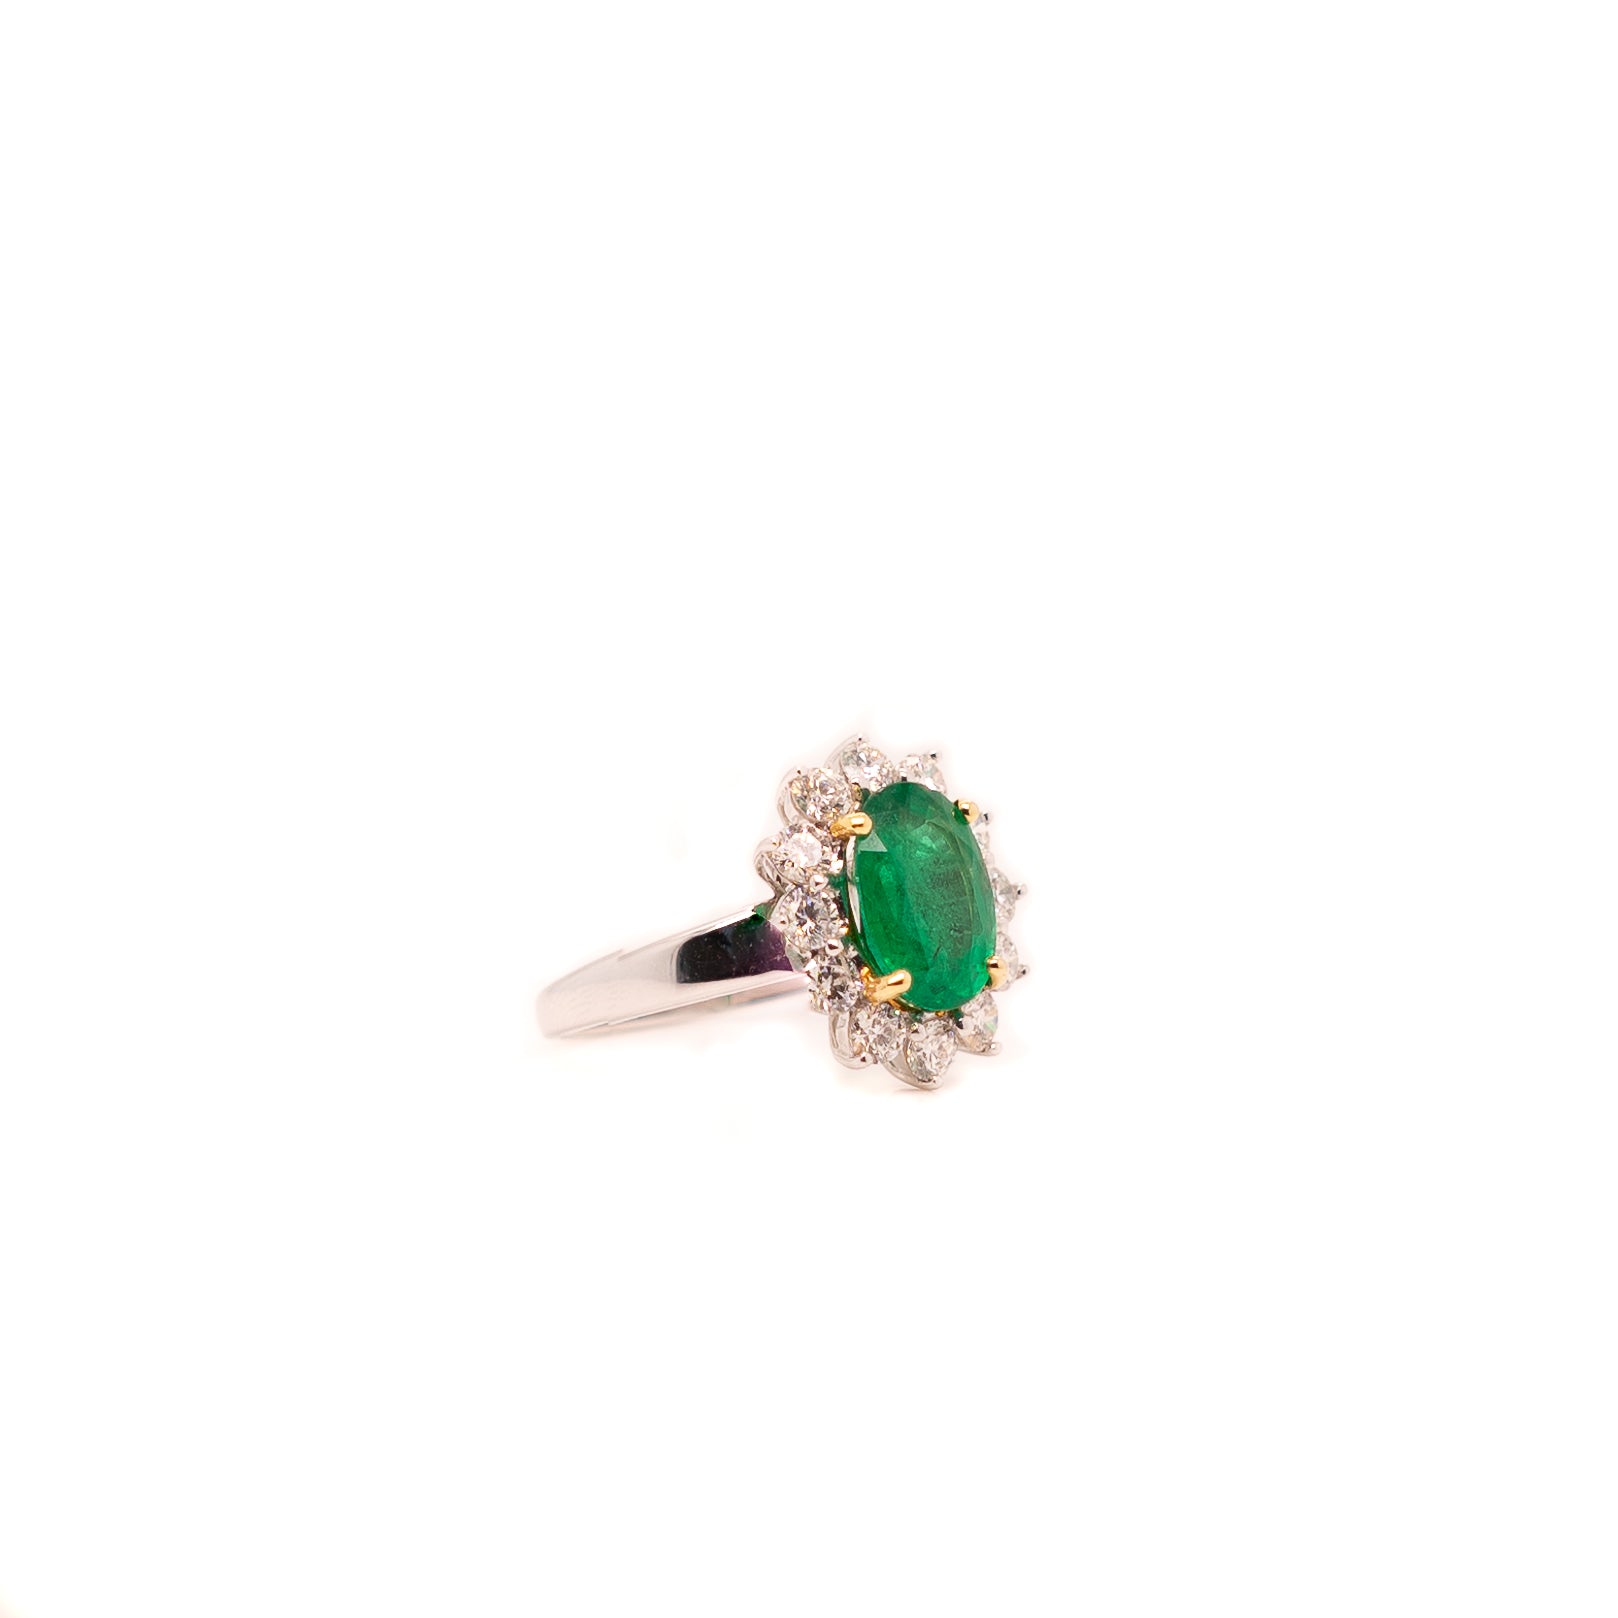 2.80ct Oval Cut Emerald Ring with Diamonds